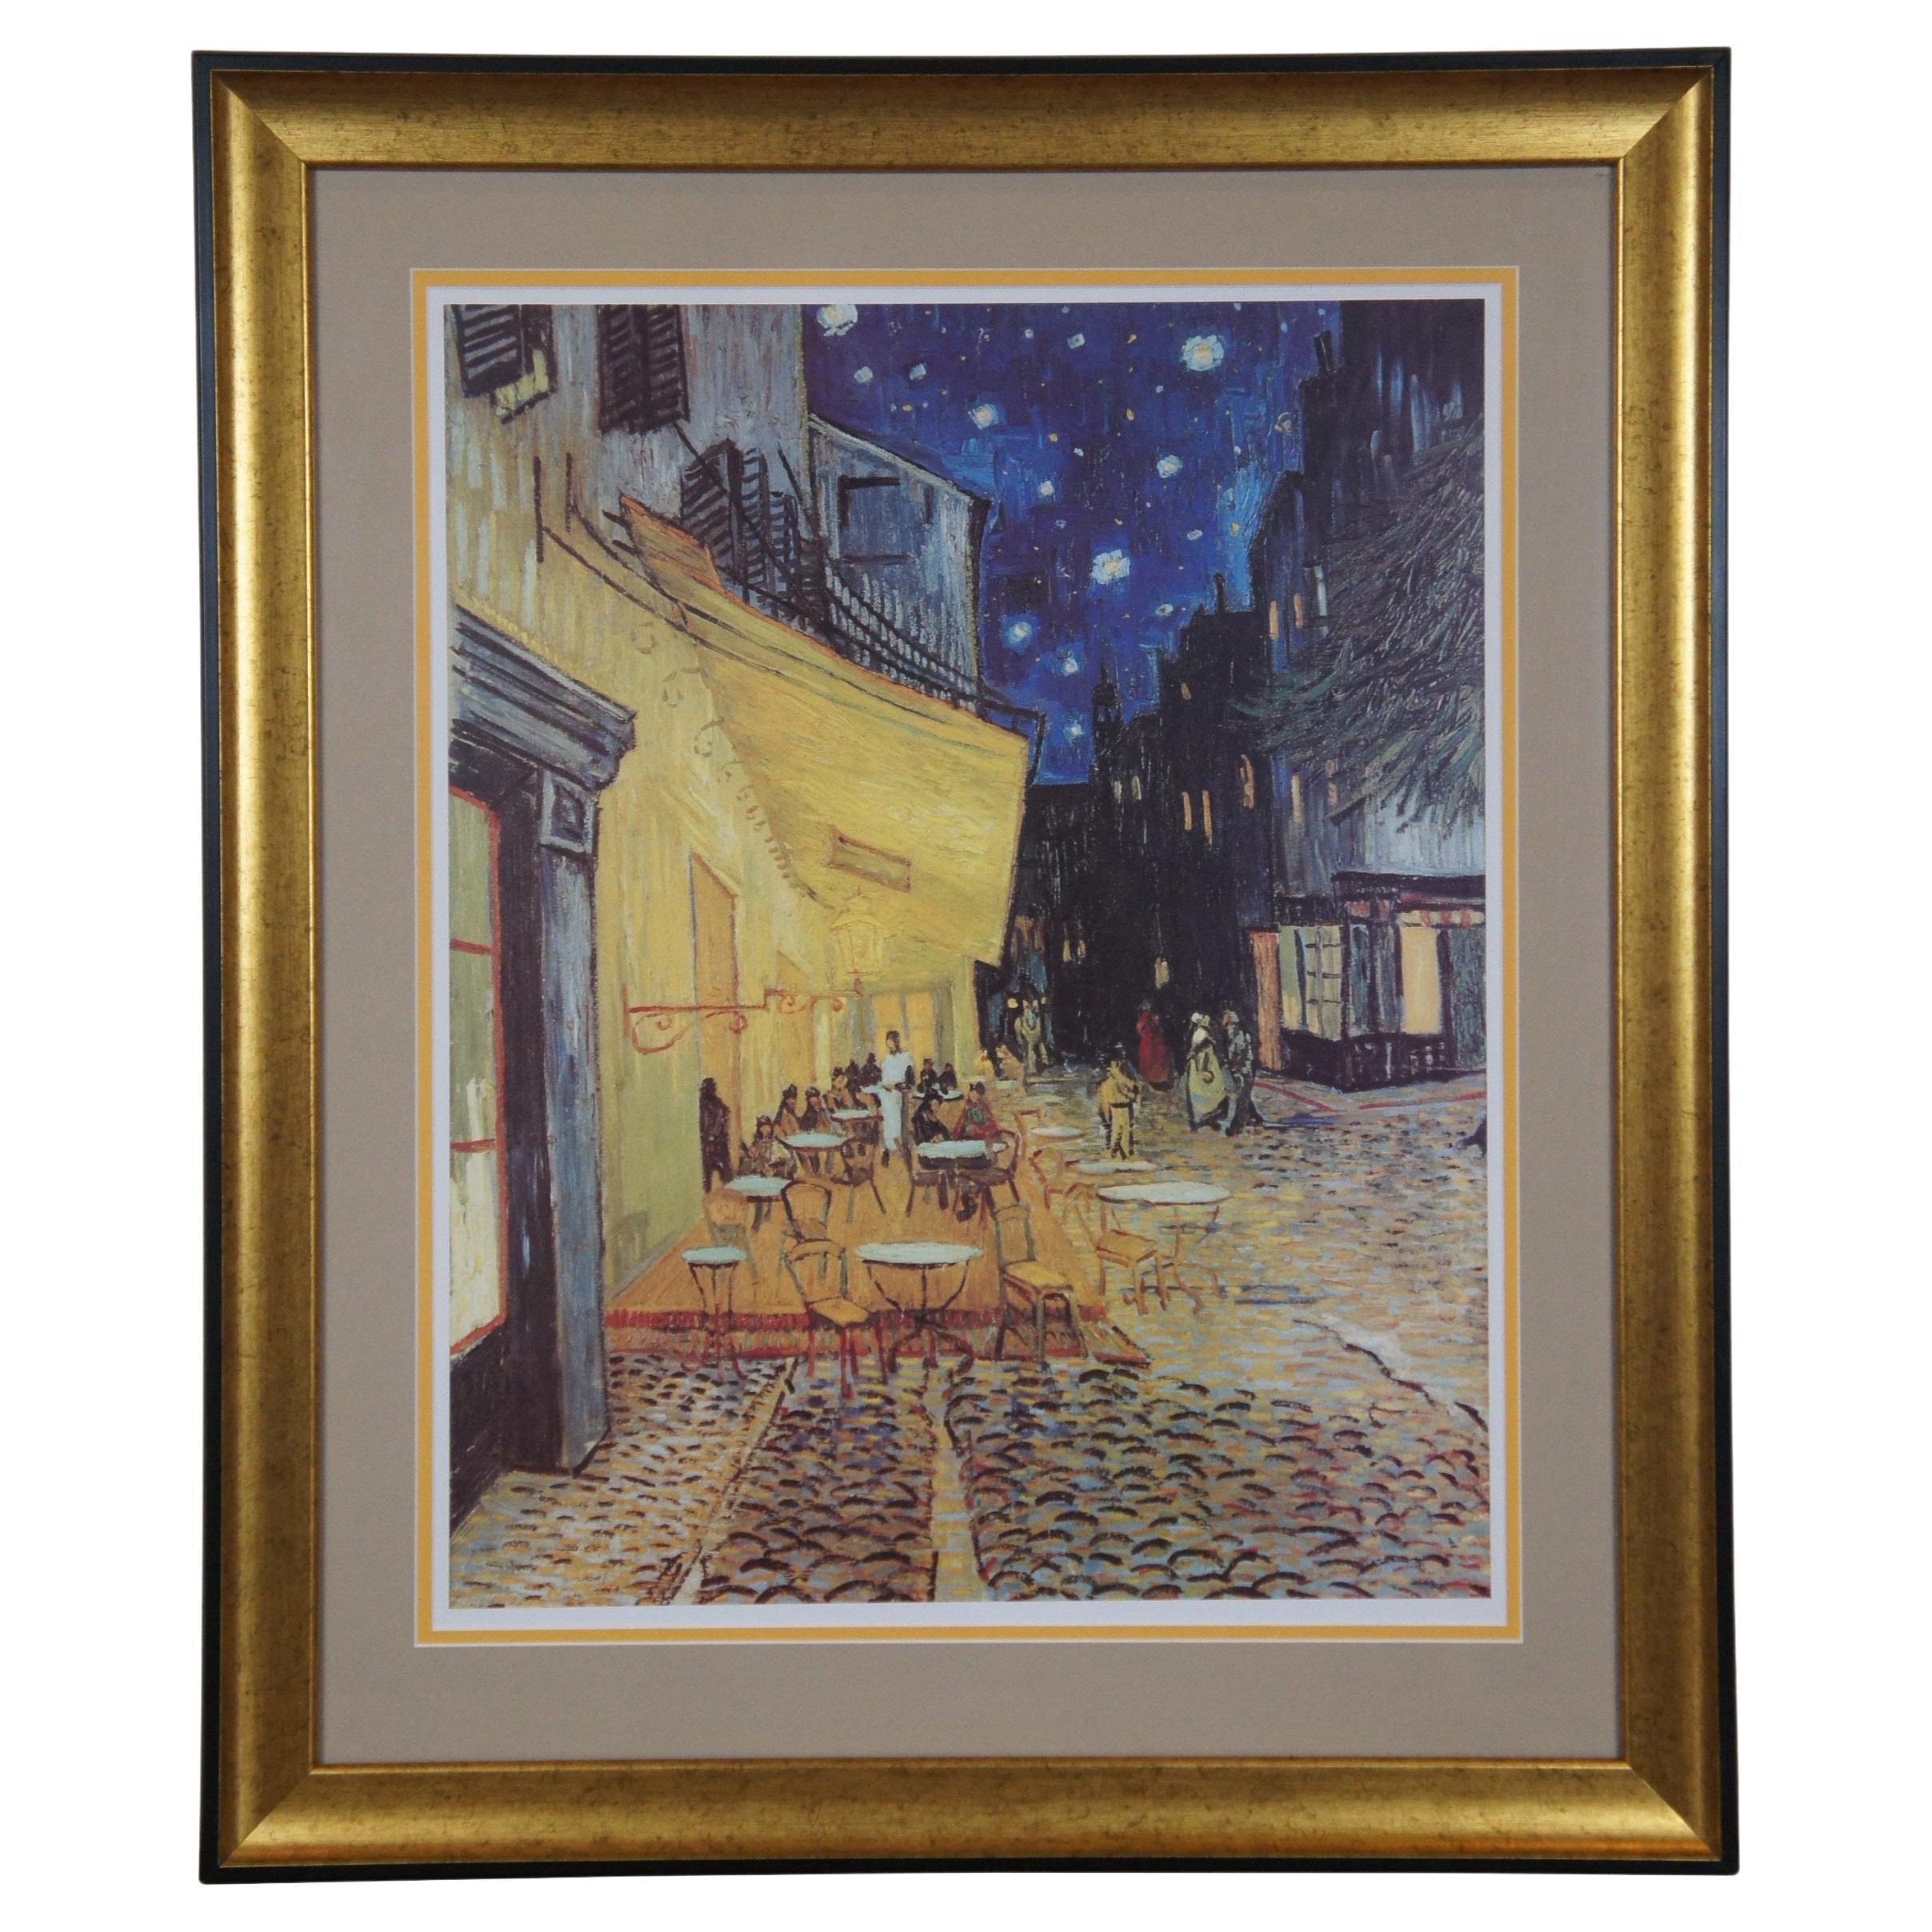 Vincent Van Gogh Cafe Terrace at Night - Lithographie - Paysage urbain 29"